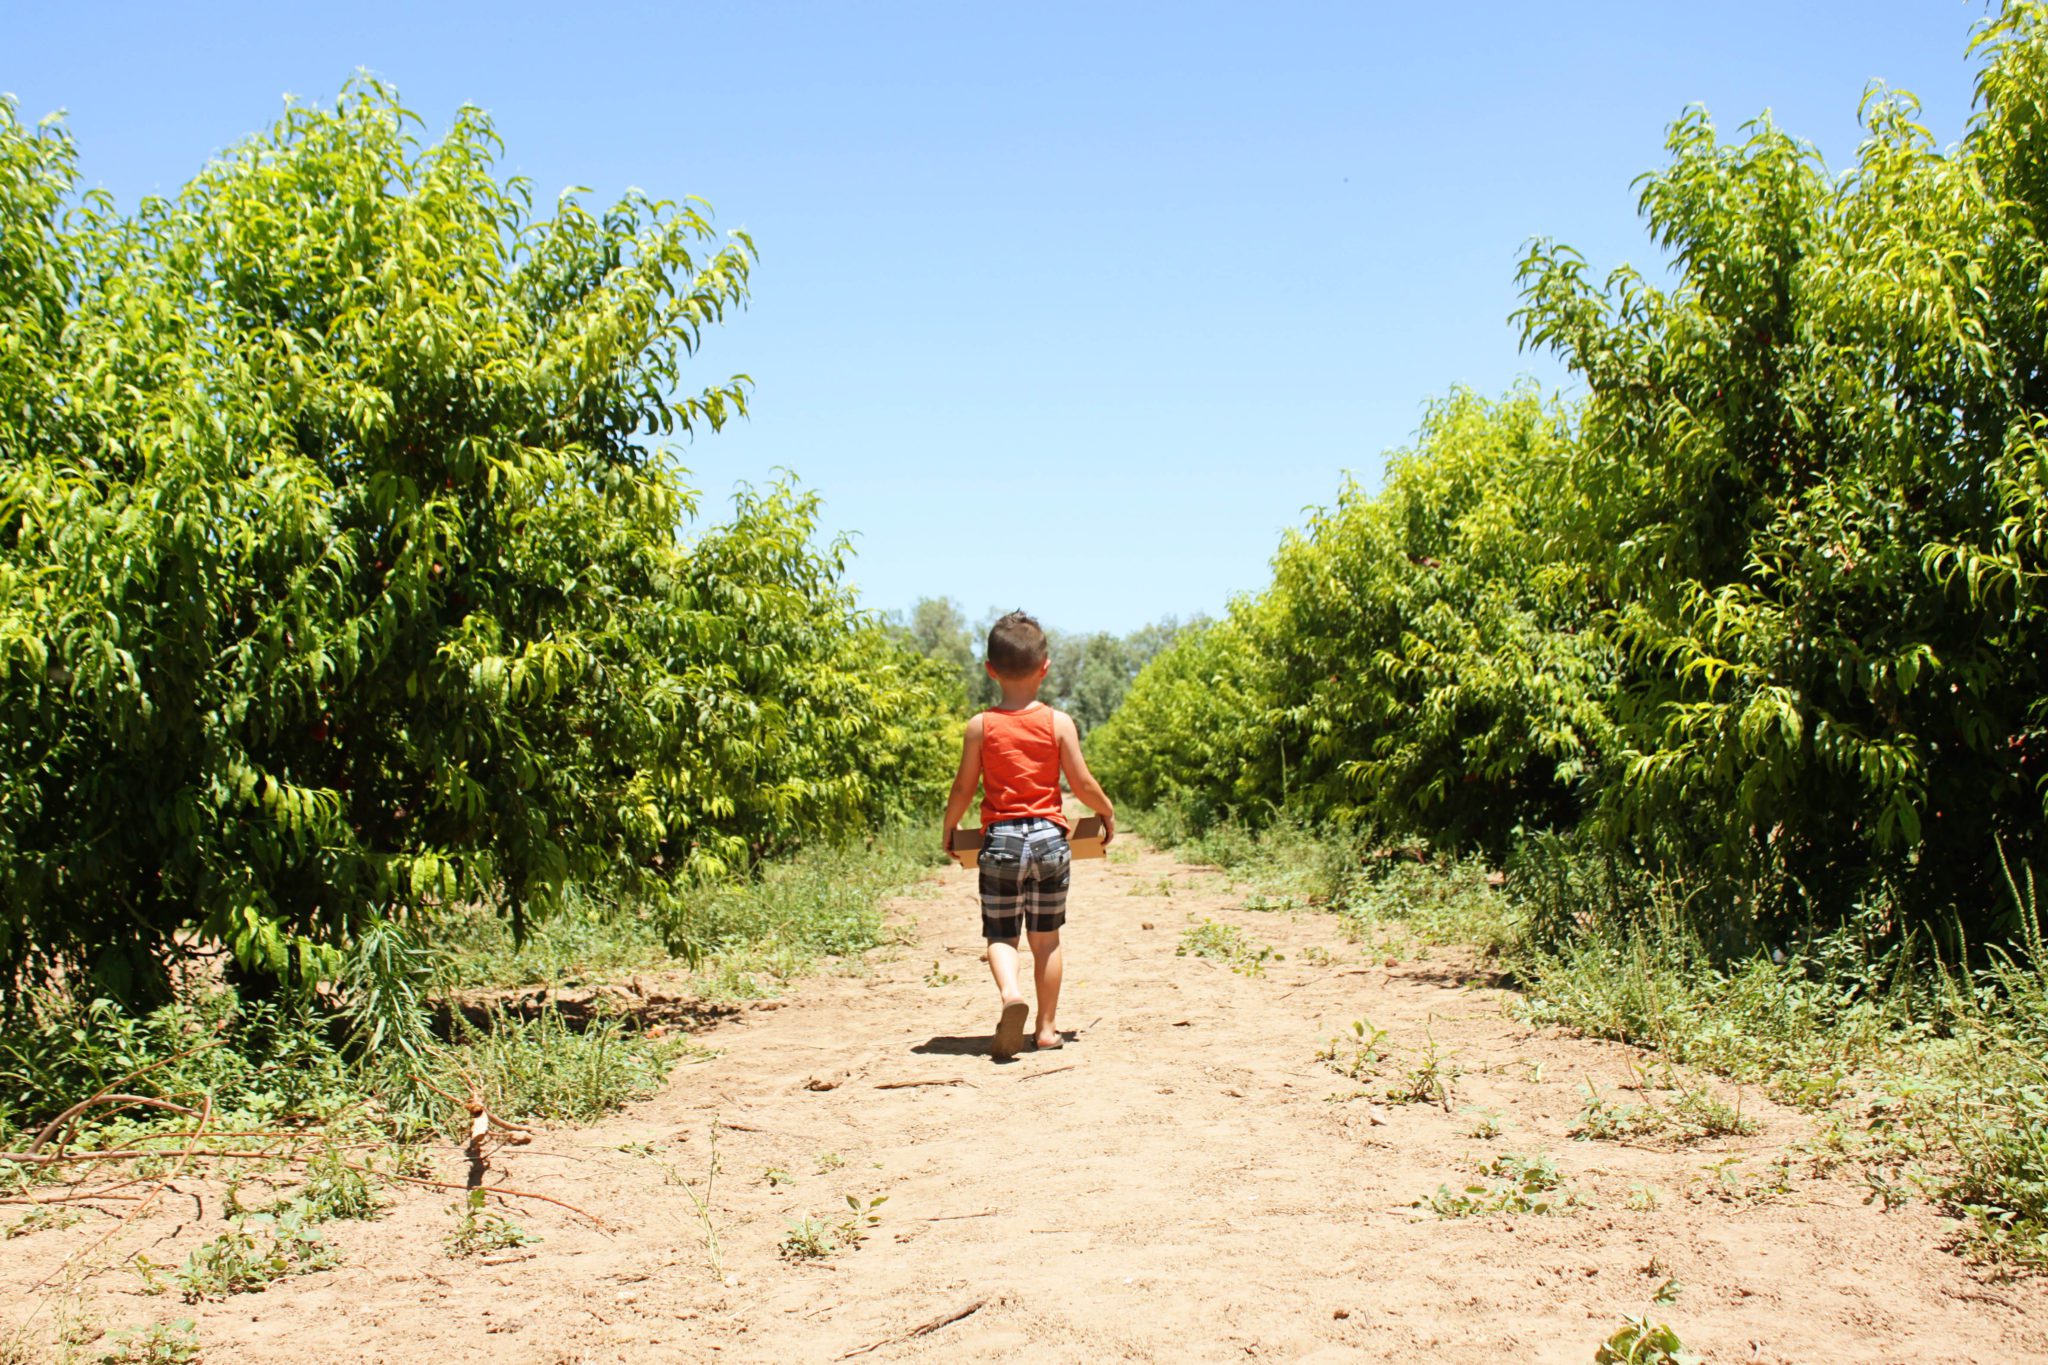 Best agricultural experiences for kids in the Phoenix East Valley-101 East Valley and Phoenix Kids activities #phoenix #arizona #schnepffarms